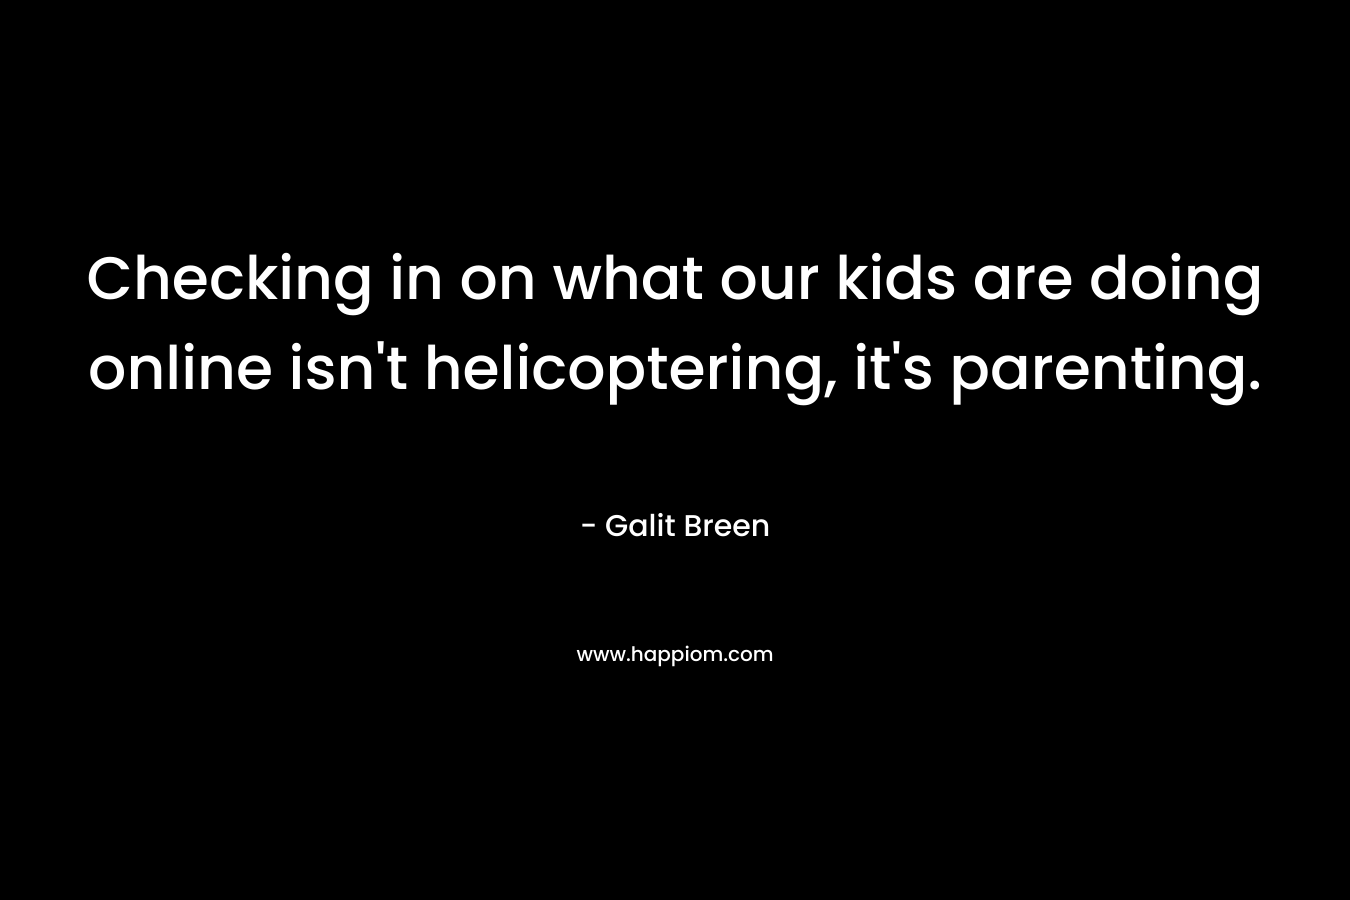 Checking in on what our kids are doing online isn’t helicoptering, it’s parenting. – Galit Breen